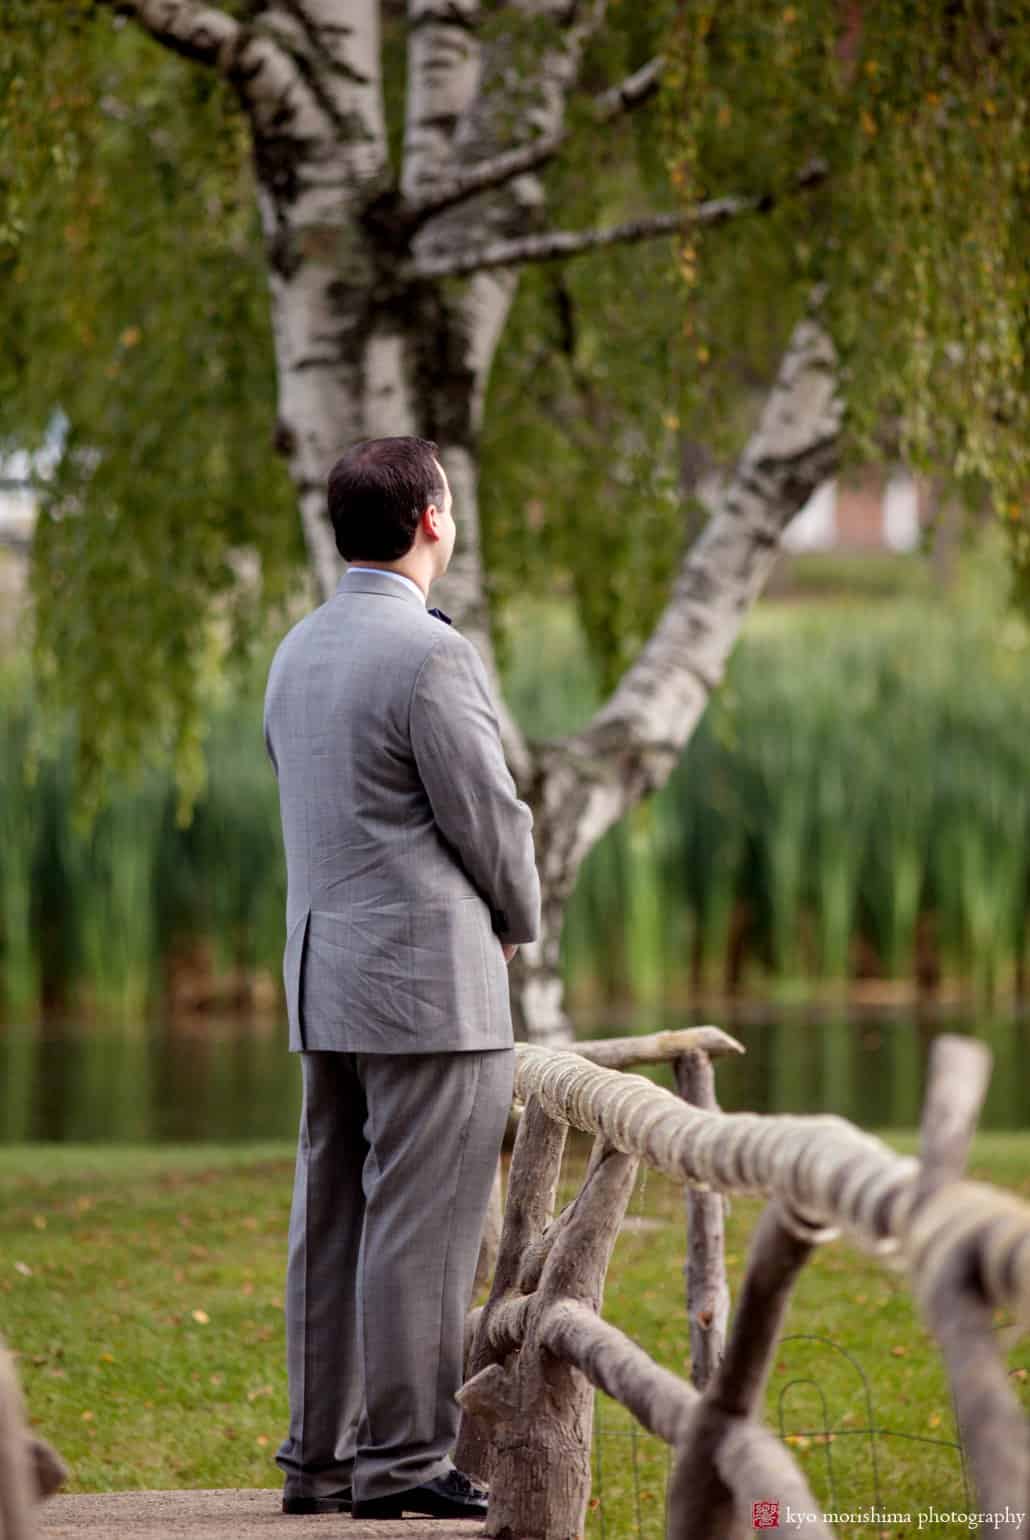 Groom awaits first look next to weeping willow tree, photographed by Perona Farms wedding photographer Kyo Morishima